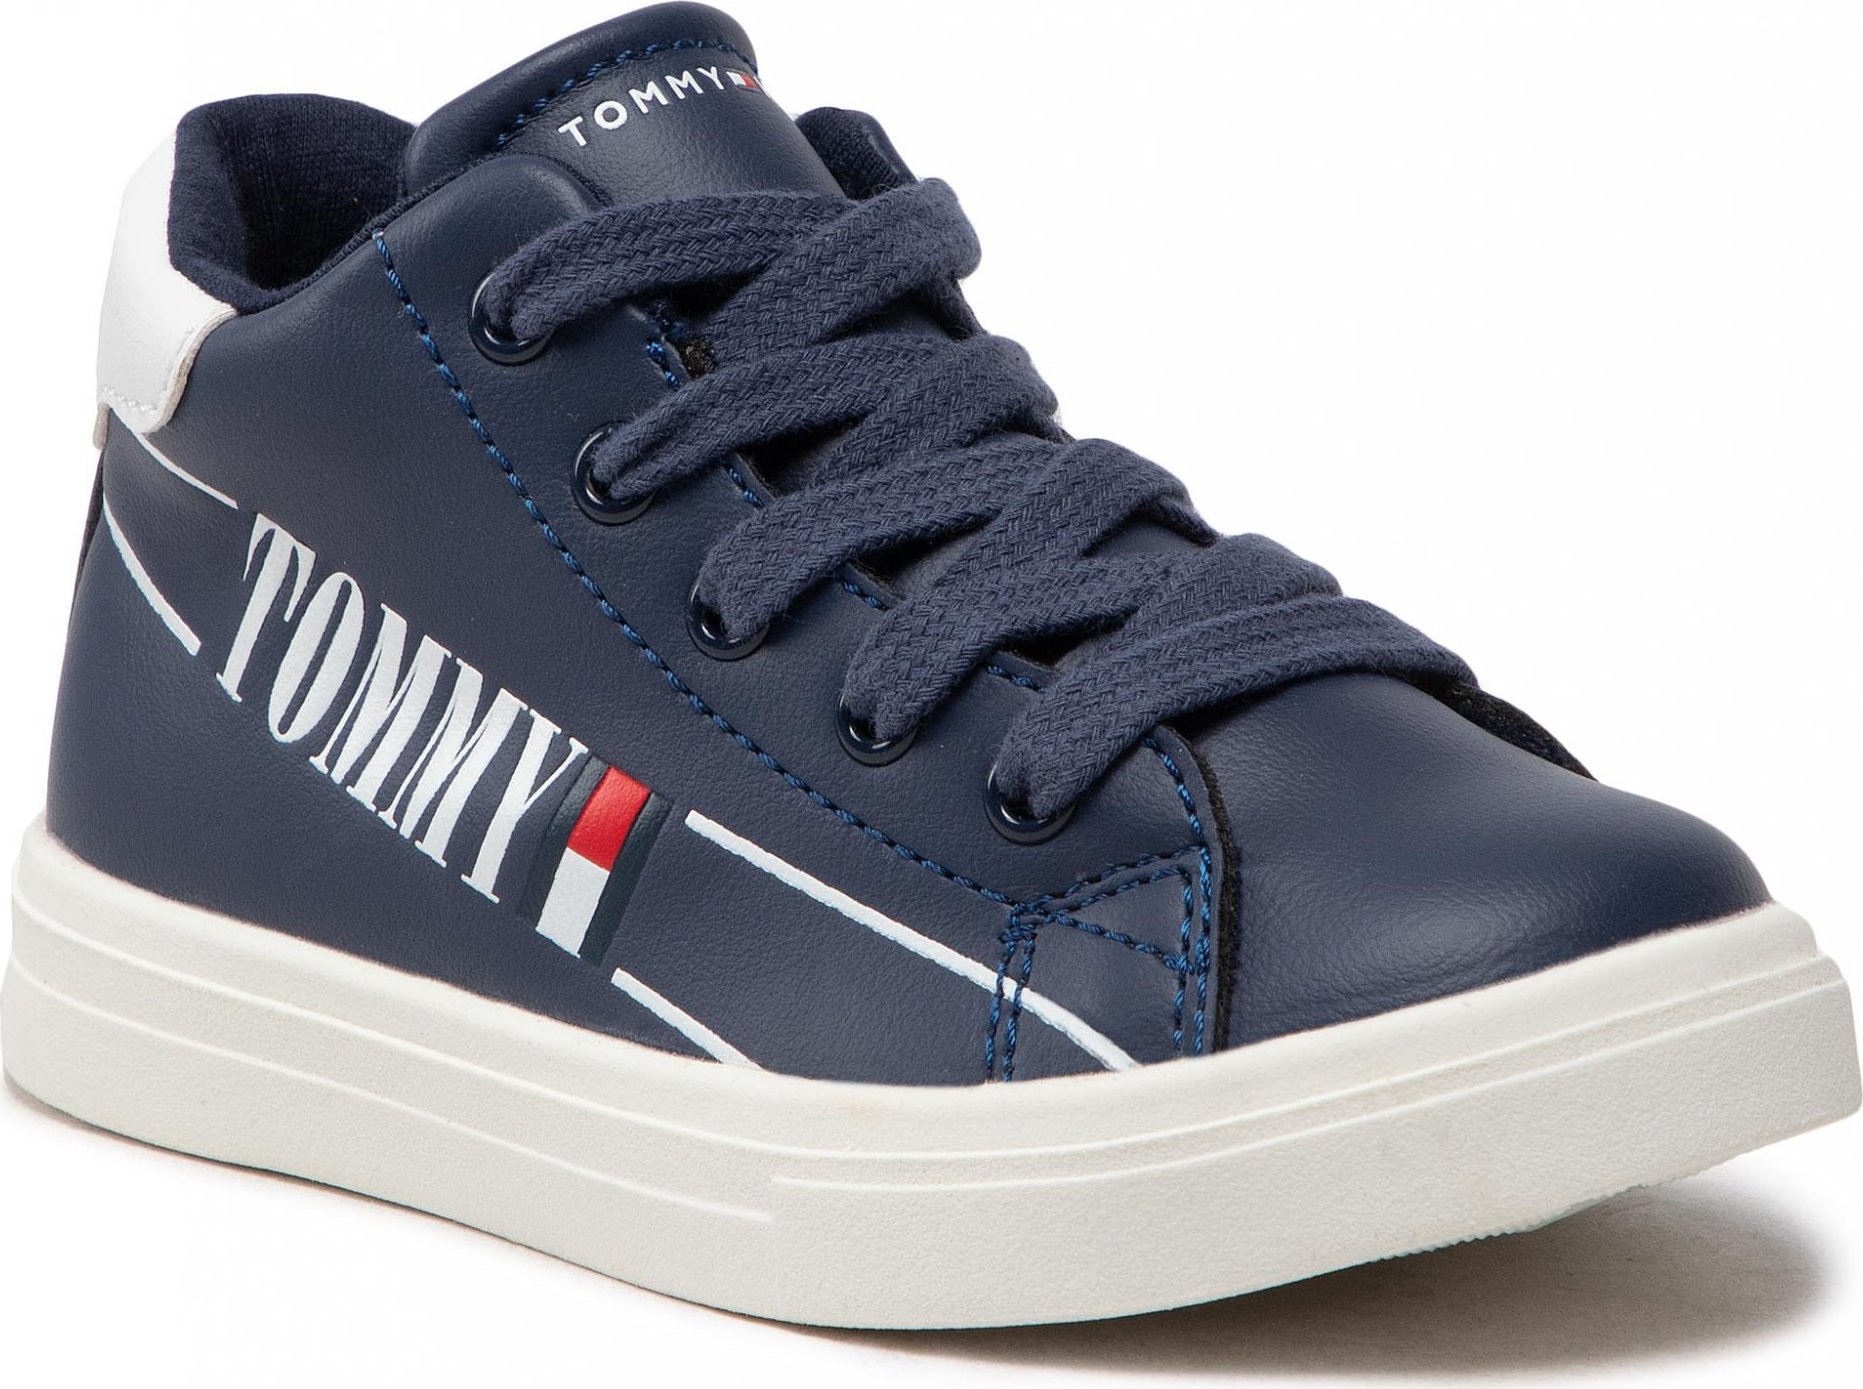 TOMMY HILFIGER Higt Top Lace-Up Sneaker T1B9-32459-1431